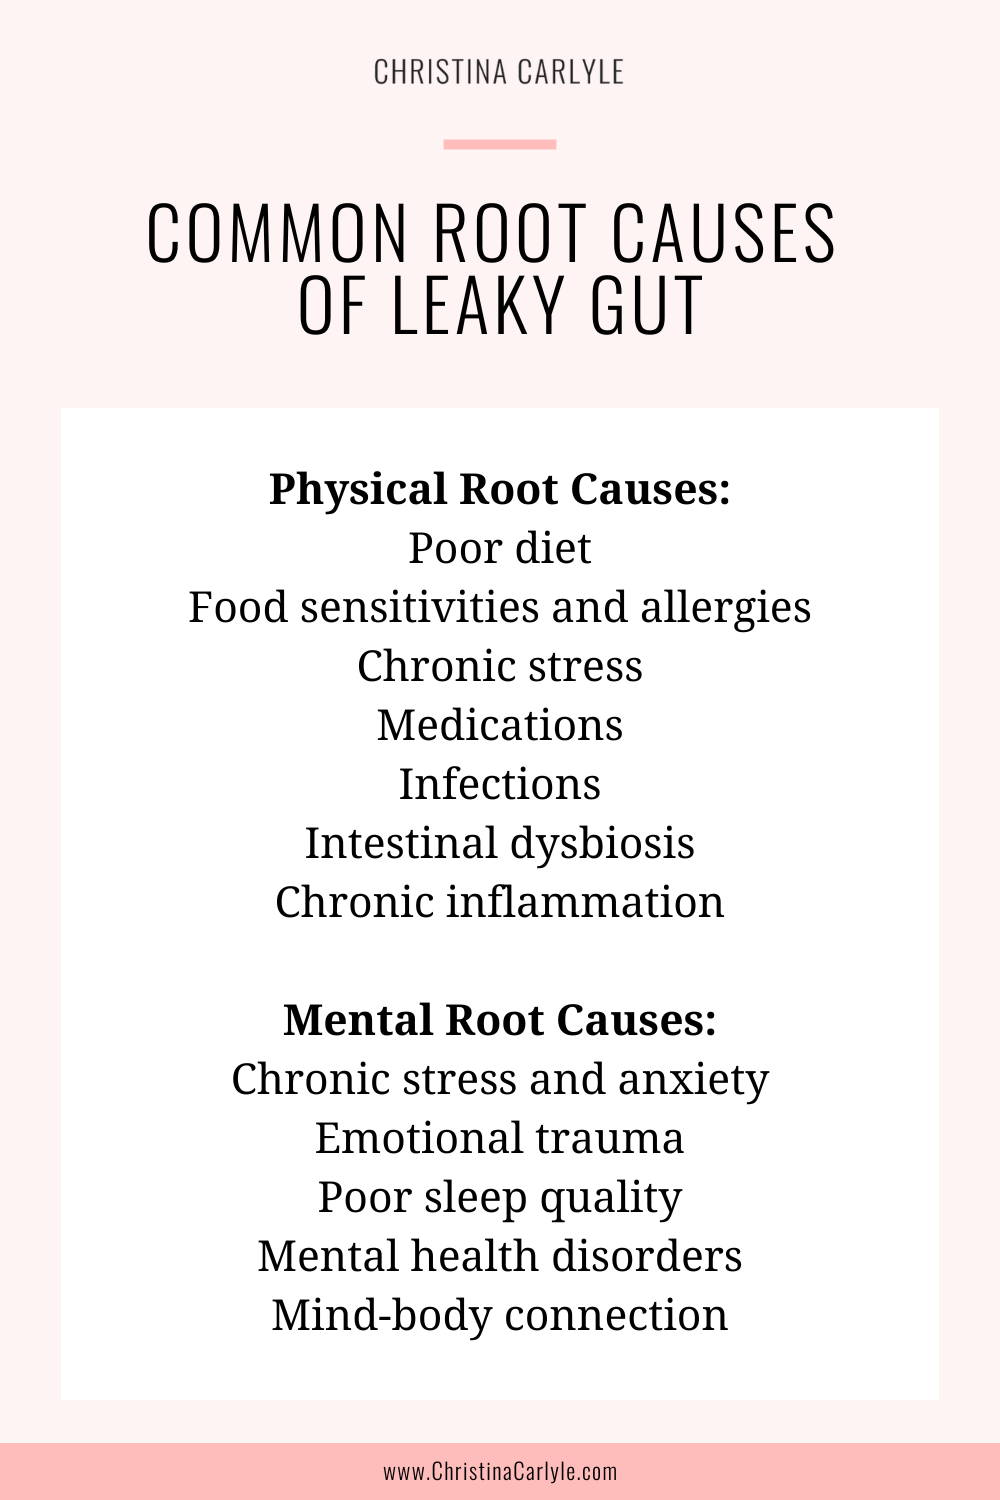 a list of the root causes of leaky gut